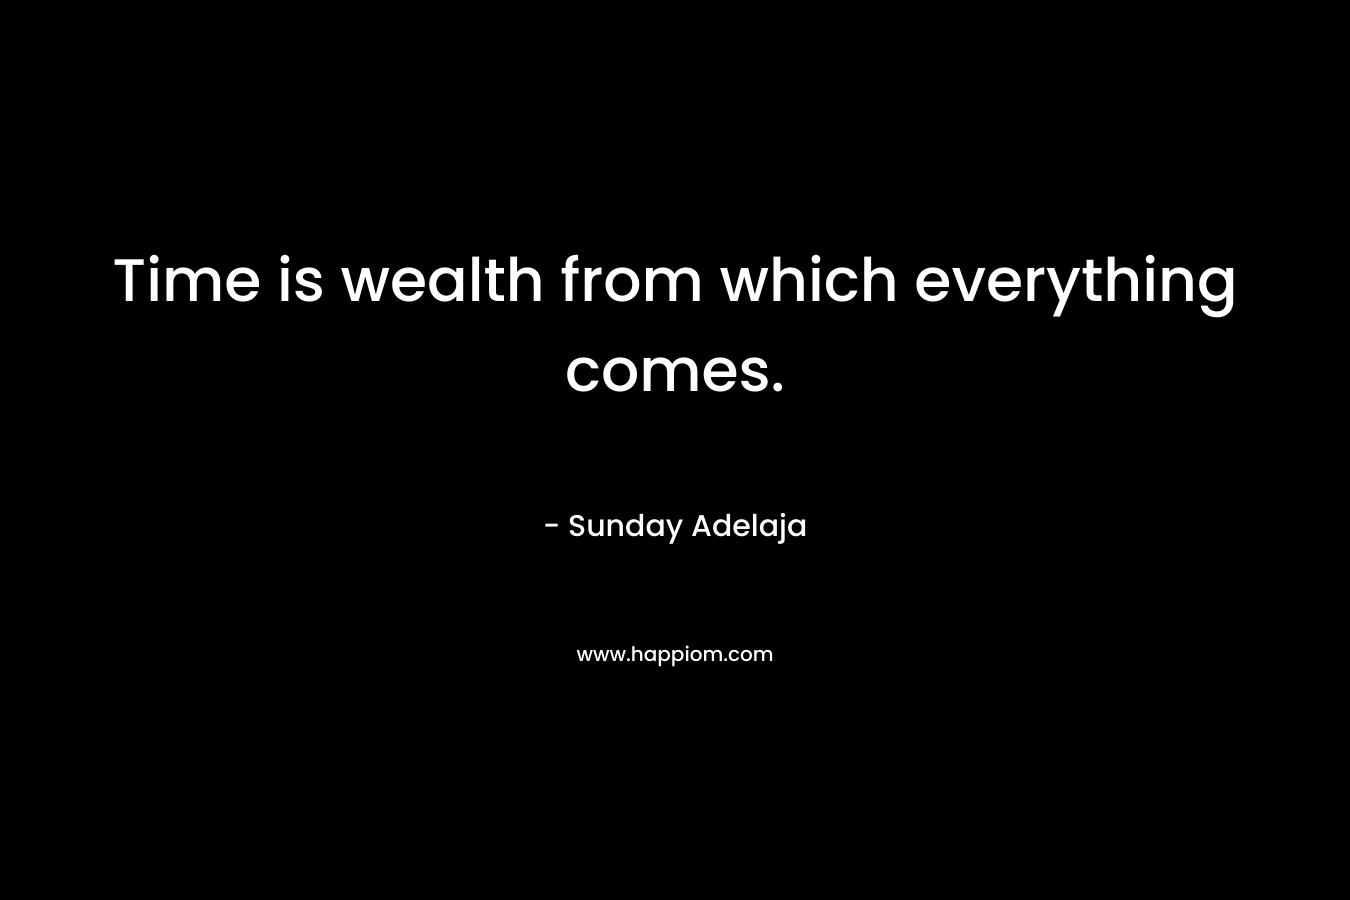 Time is wealth from which everything comes.